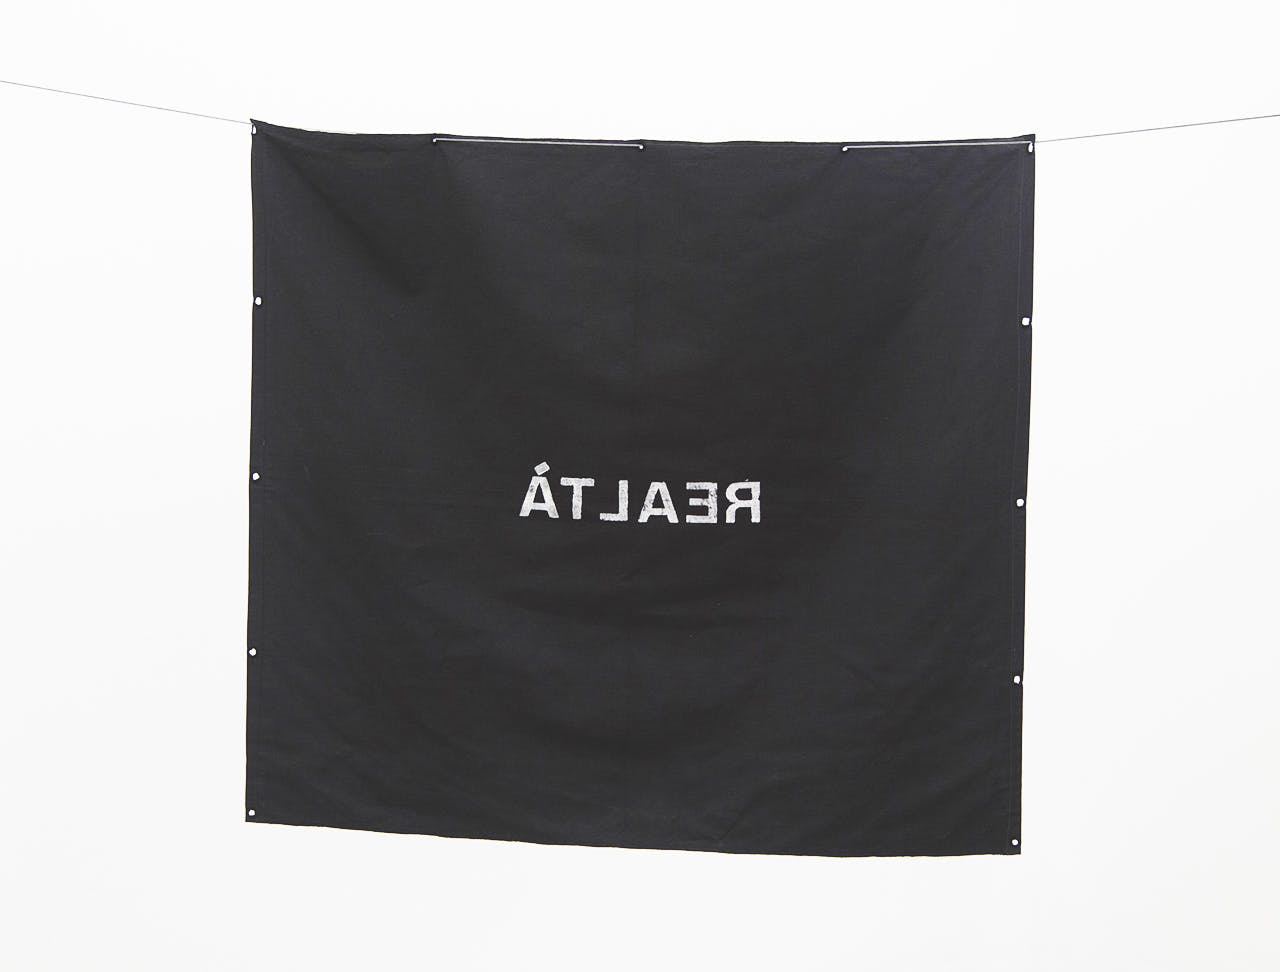 Black and white image of a black fabric square with "REALTÀ" written backwards in white on the surface.